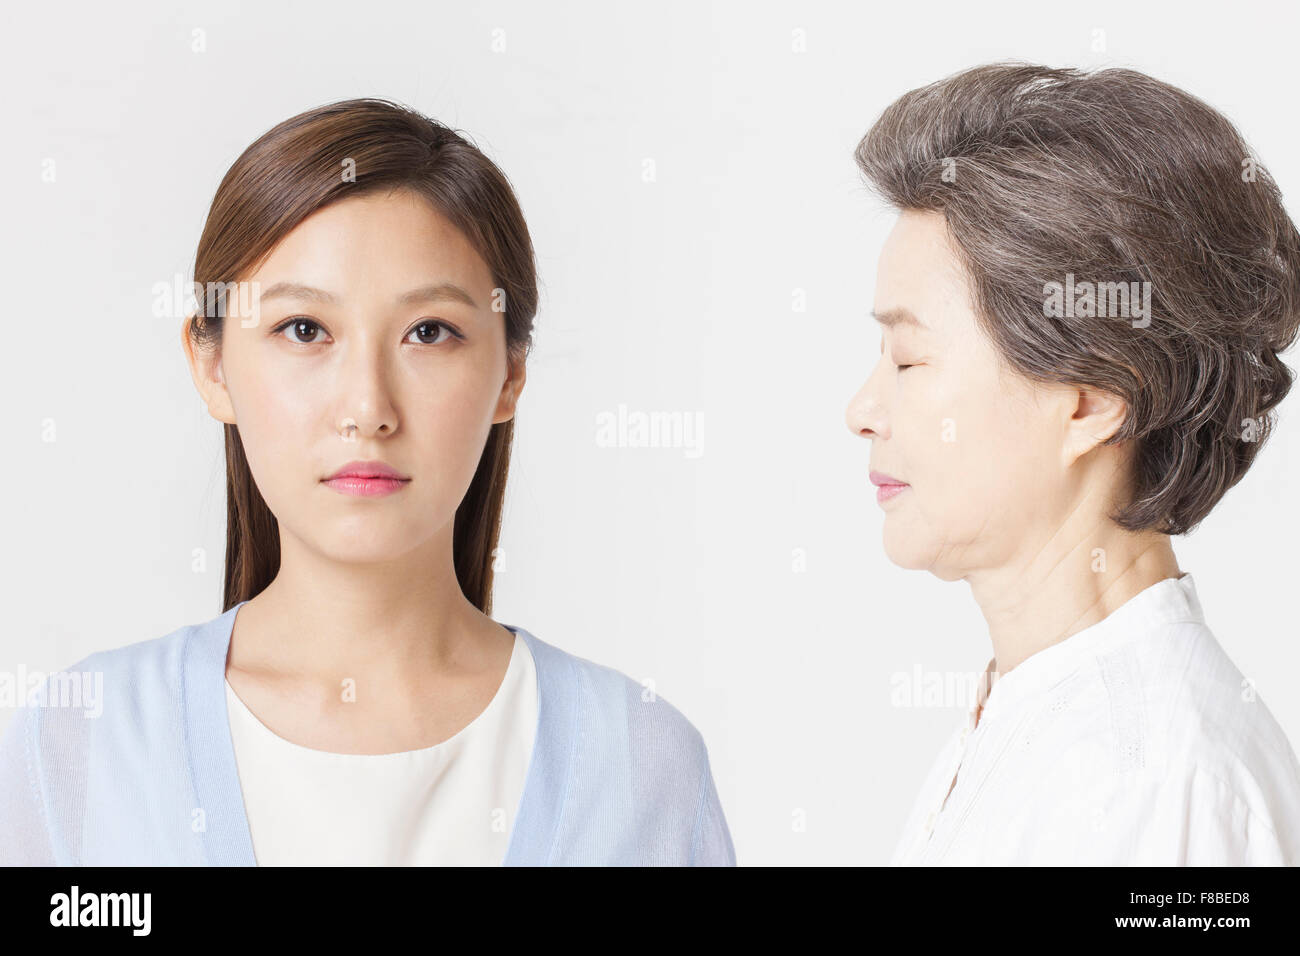 Daughter staring forward with no facial expression and mother facing her daughter with her eyes closed Stock Photo